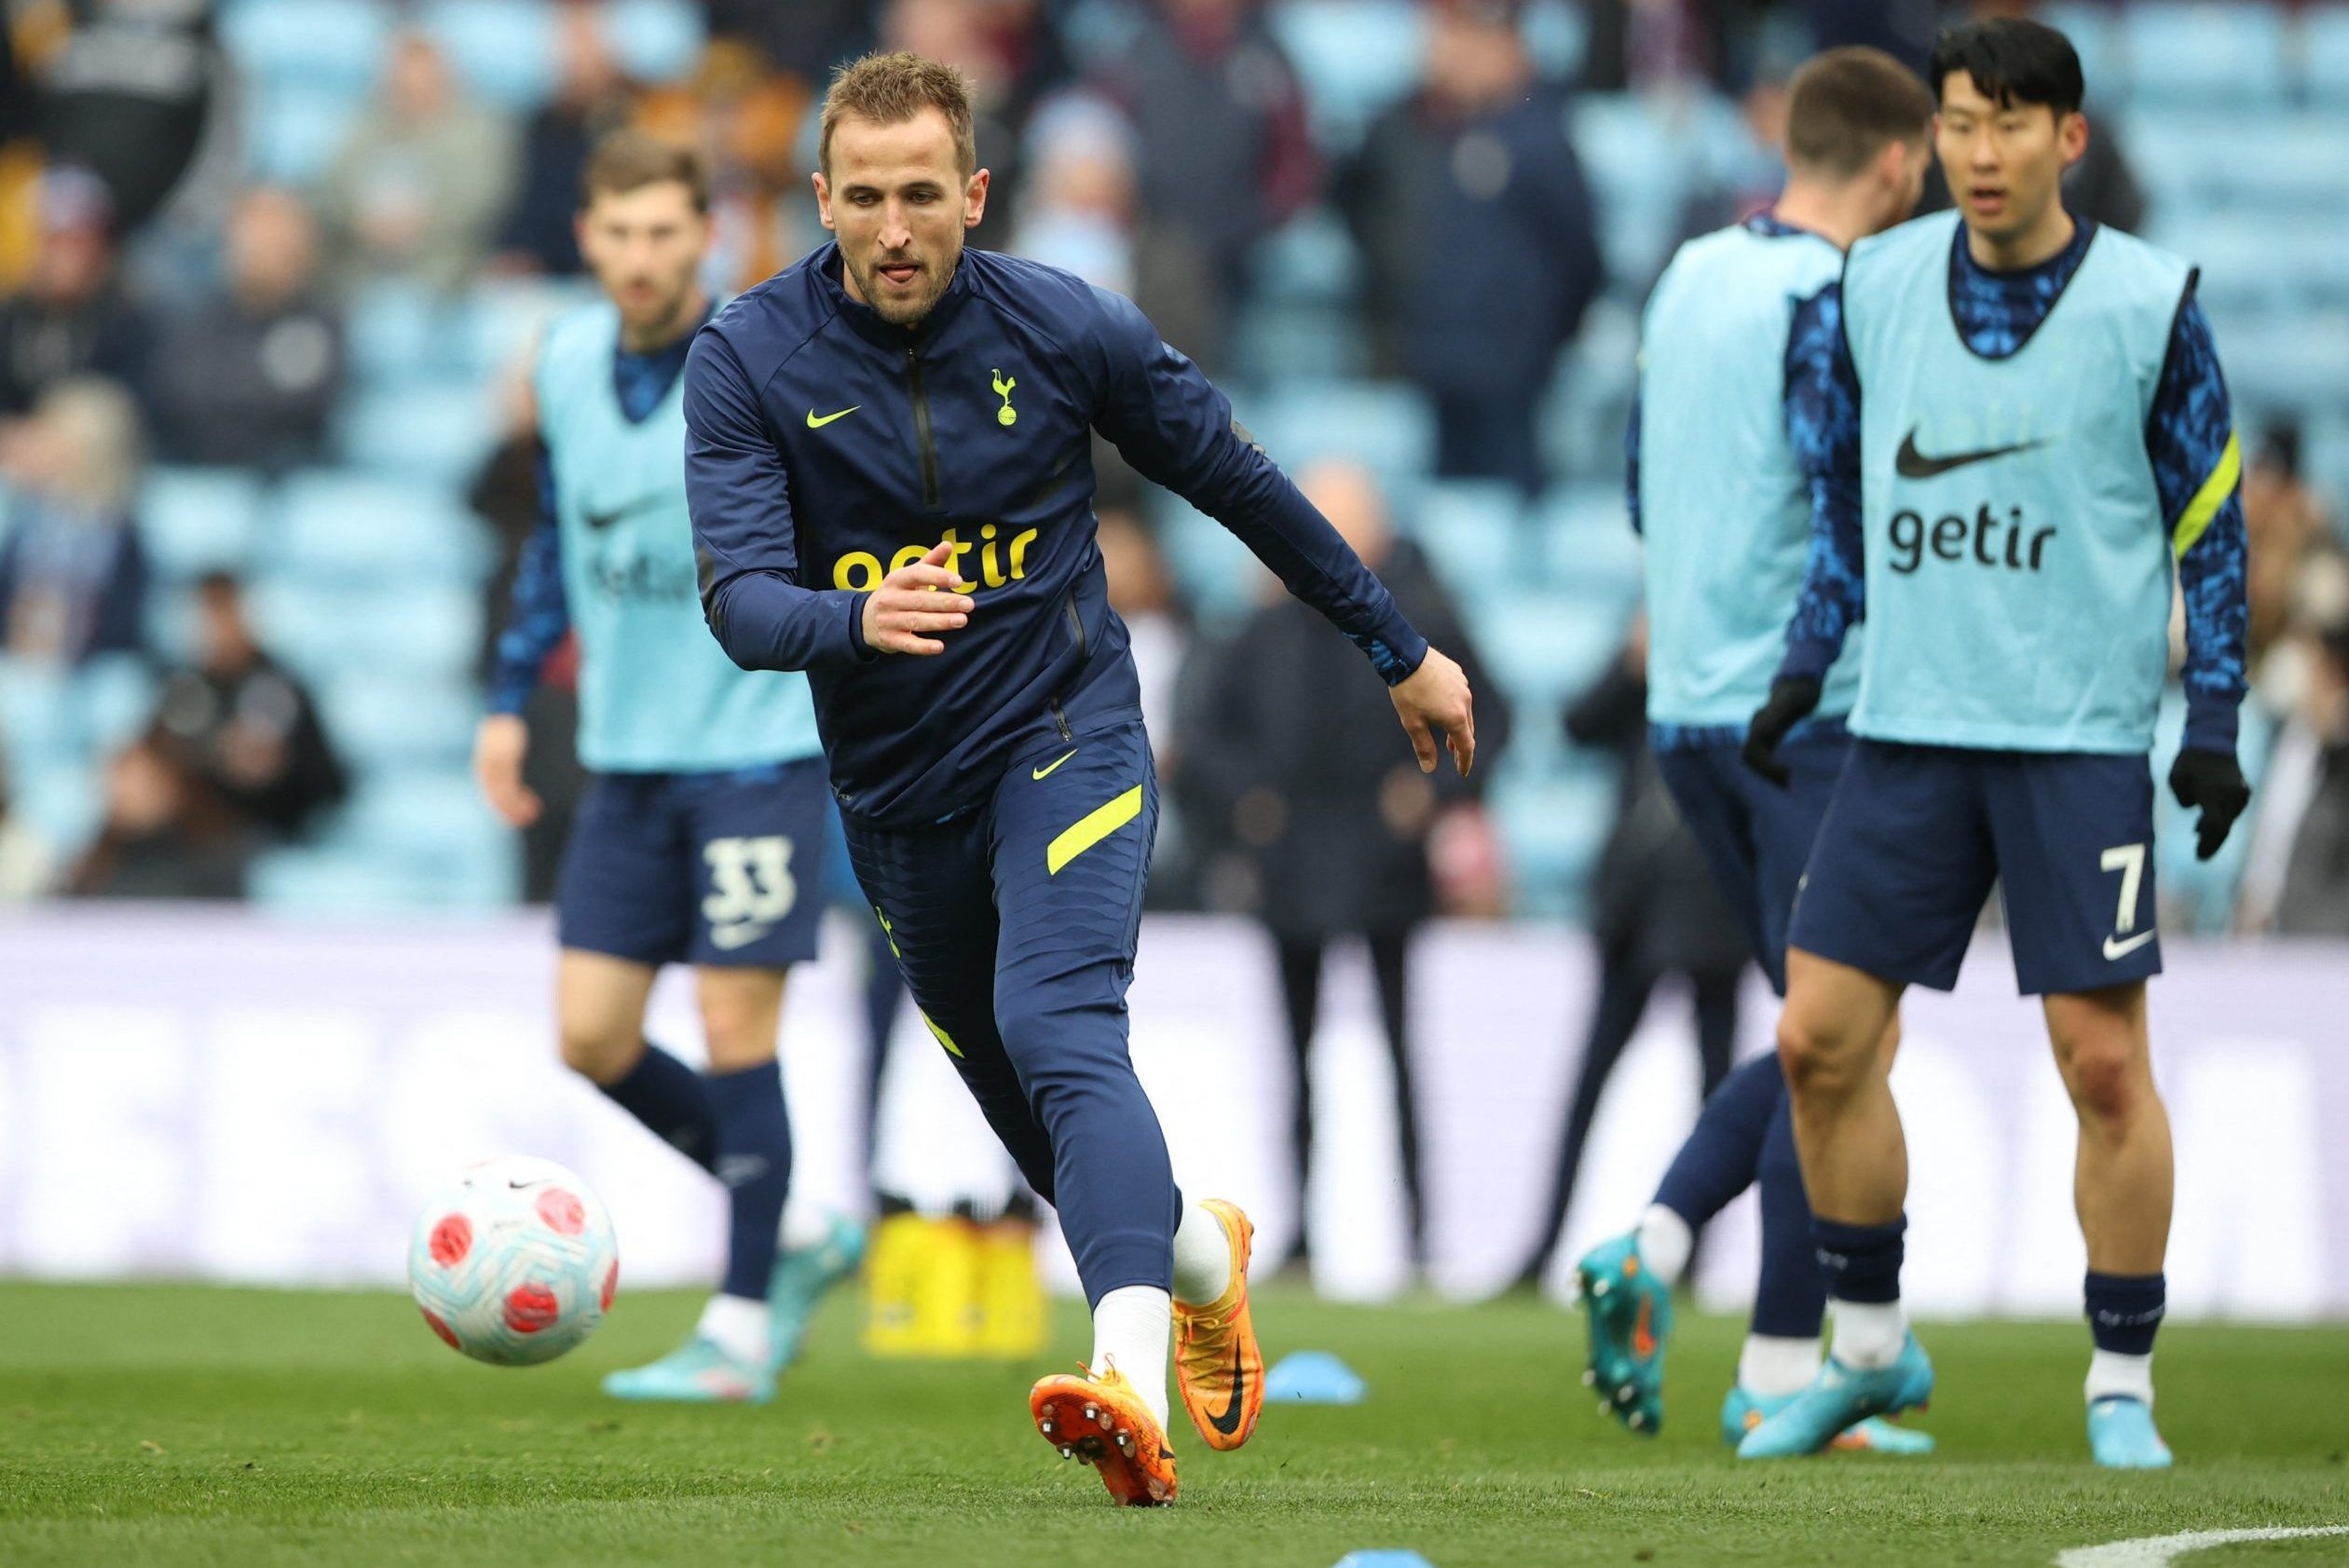 Spurs duo Harry Kane and Heung-min Son warm up